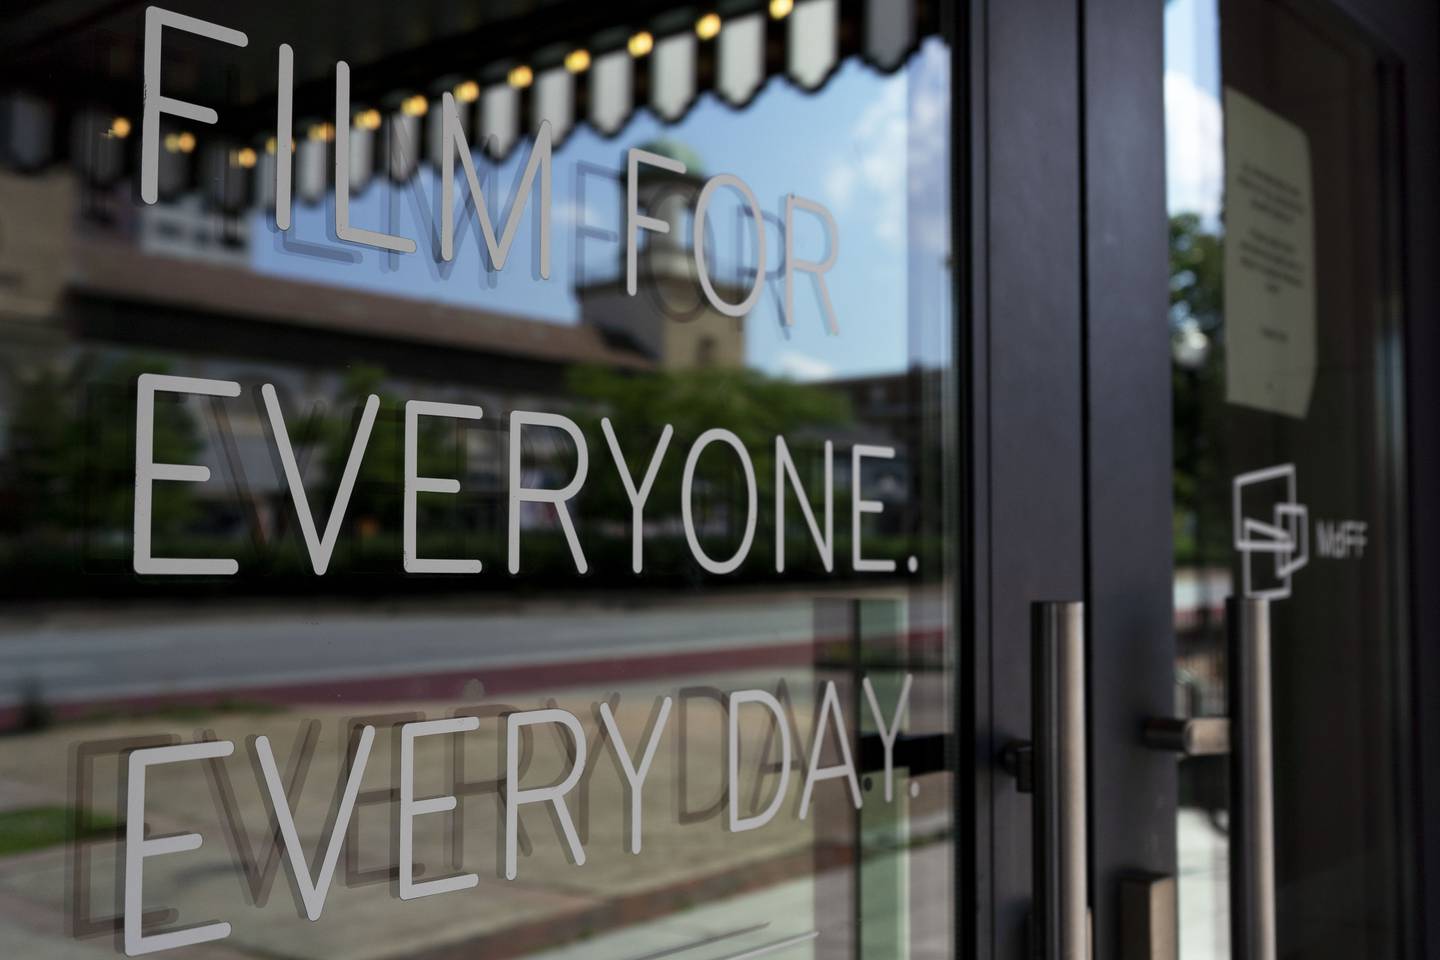 A sign on the door of Parkway Theatre that reads: "Film for everyone. Every day."